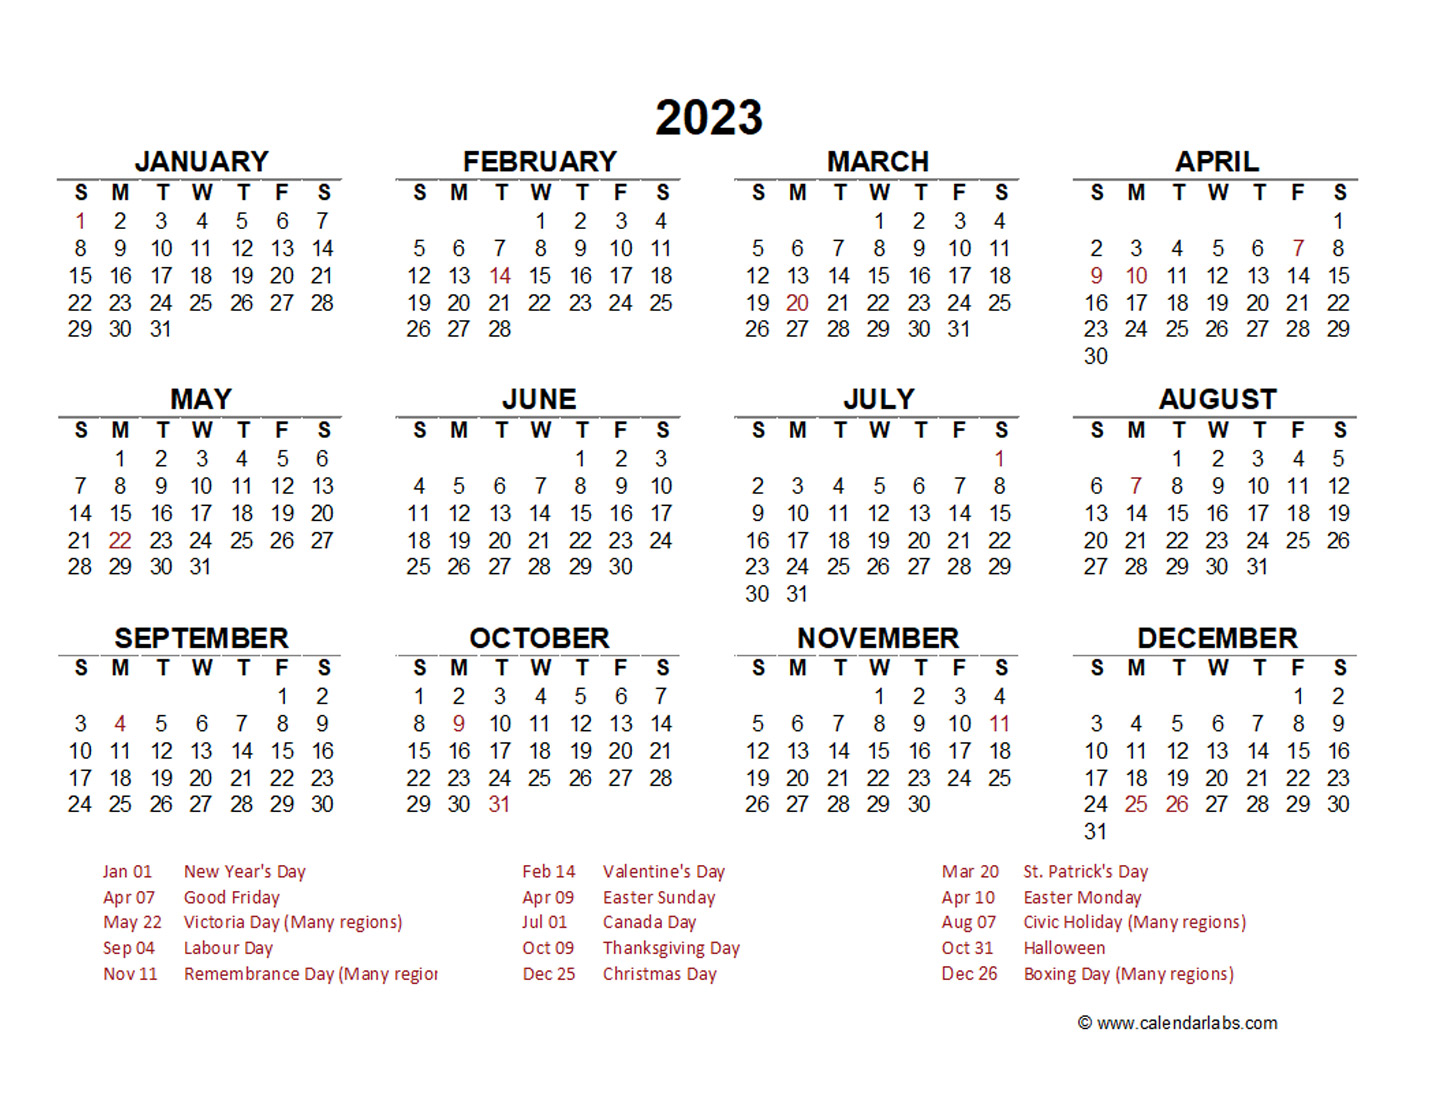 2023-calendar-with-canada-holidays-at-bottom-landscape-layout